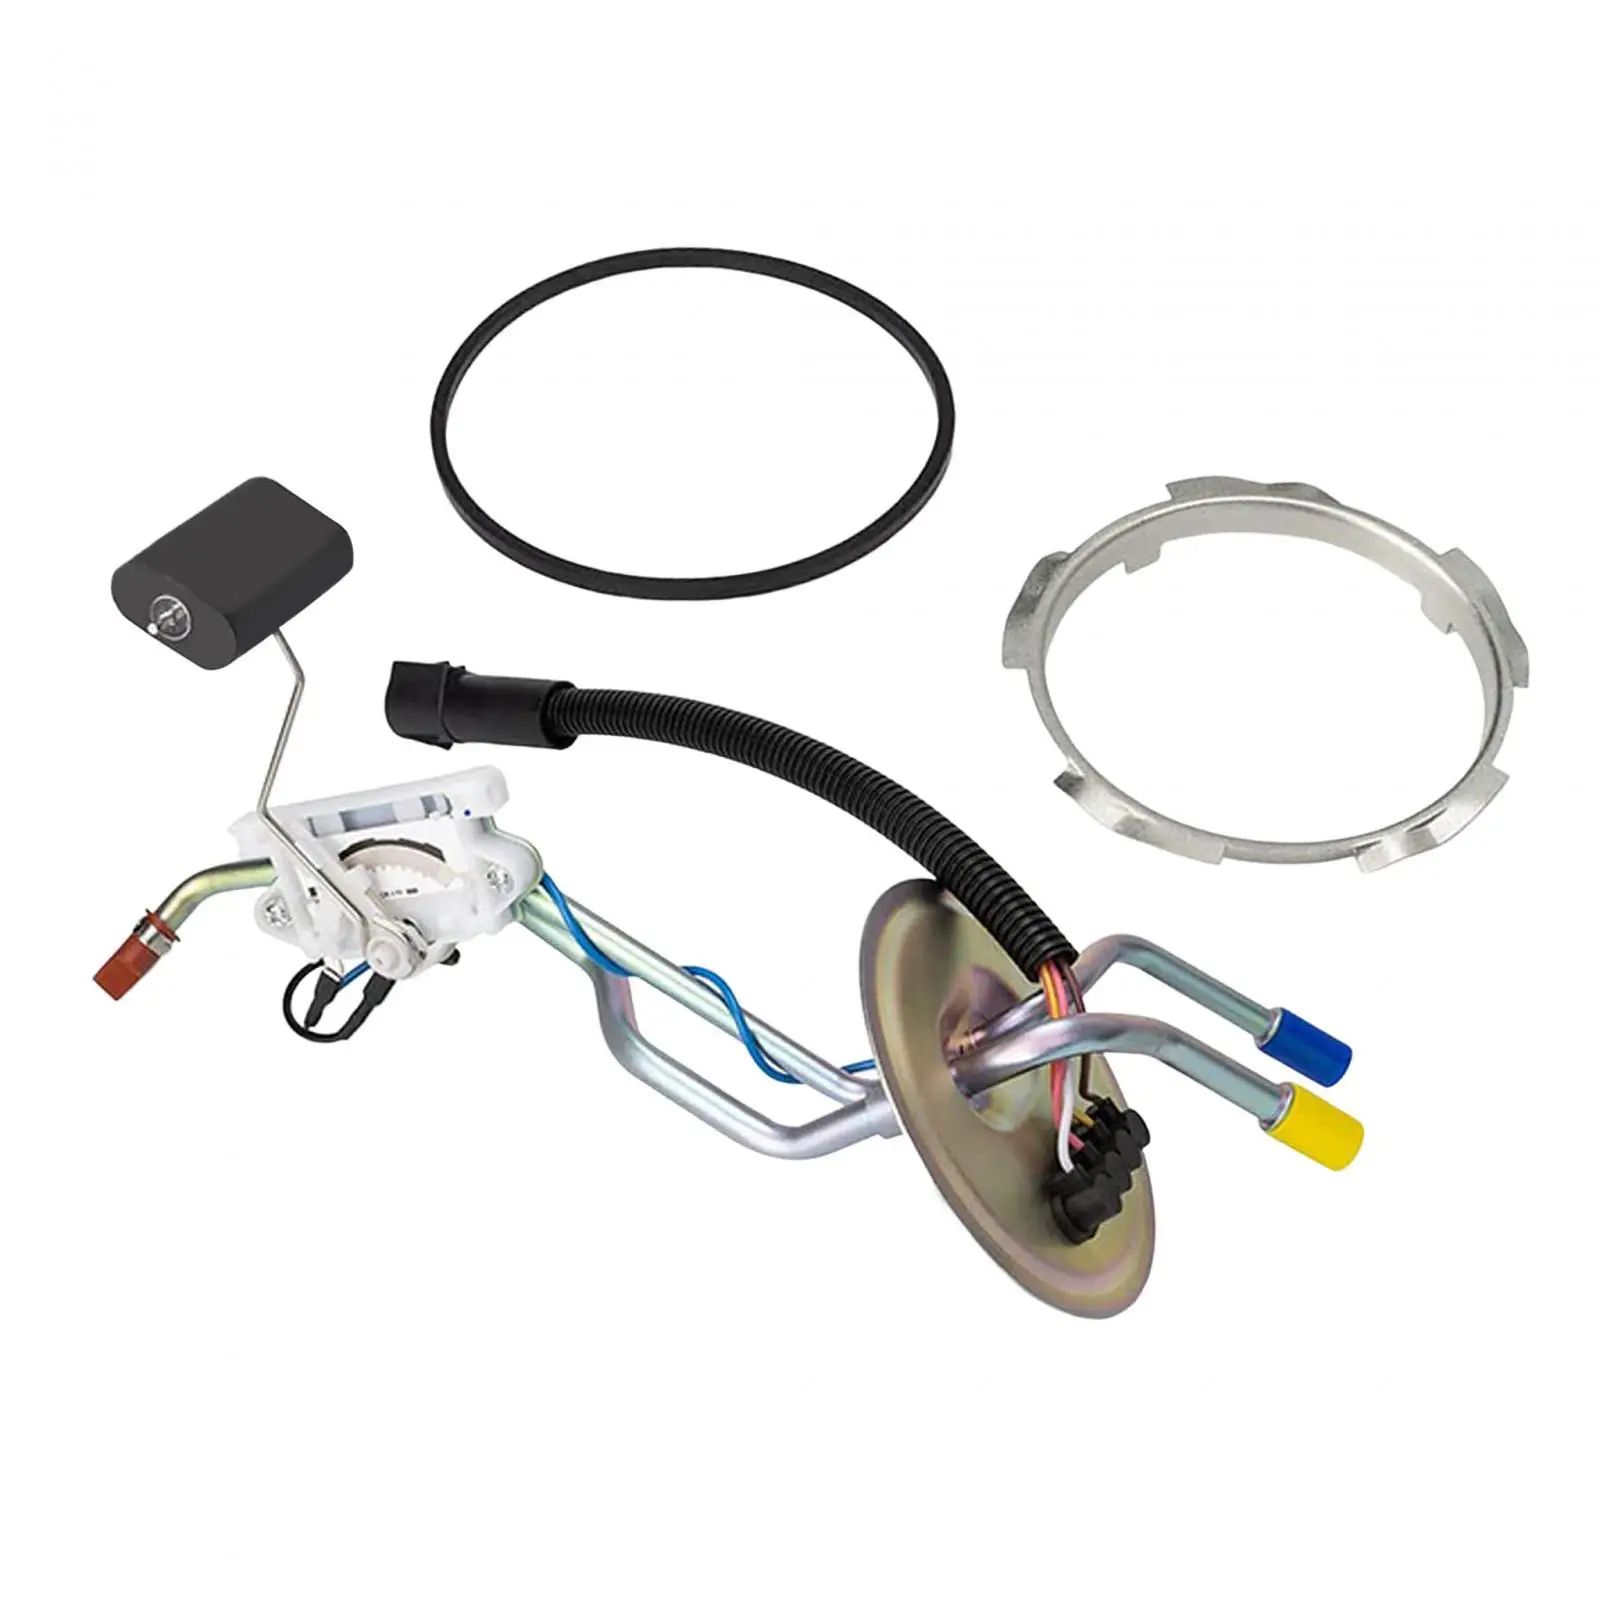 Diesel Fuel Sending Unit Repair Parts for Ford F250 F350 94-97 Auto Accessories Easy Installation Stable Performance